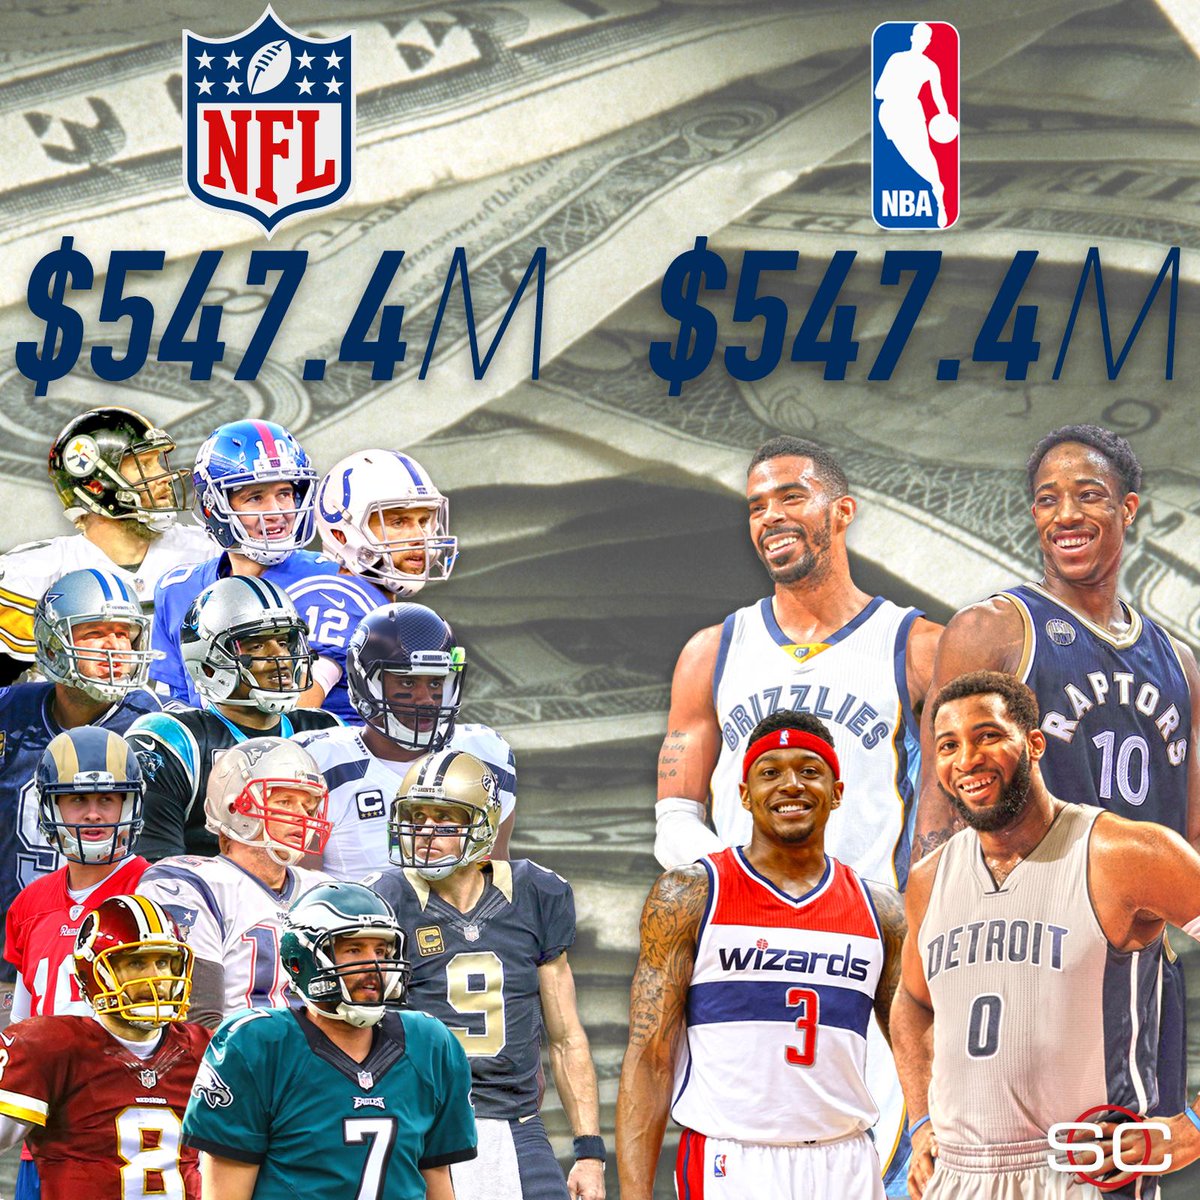 who makes more money nfl or nba